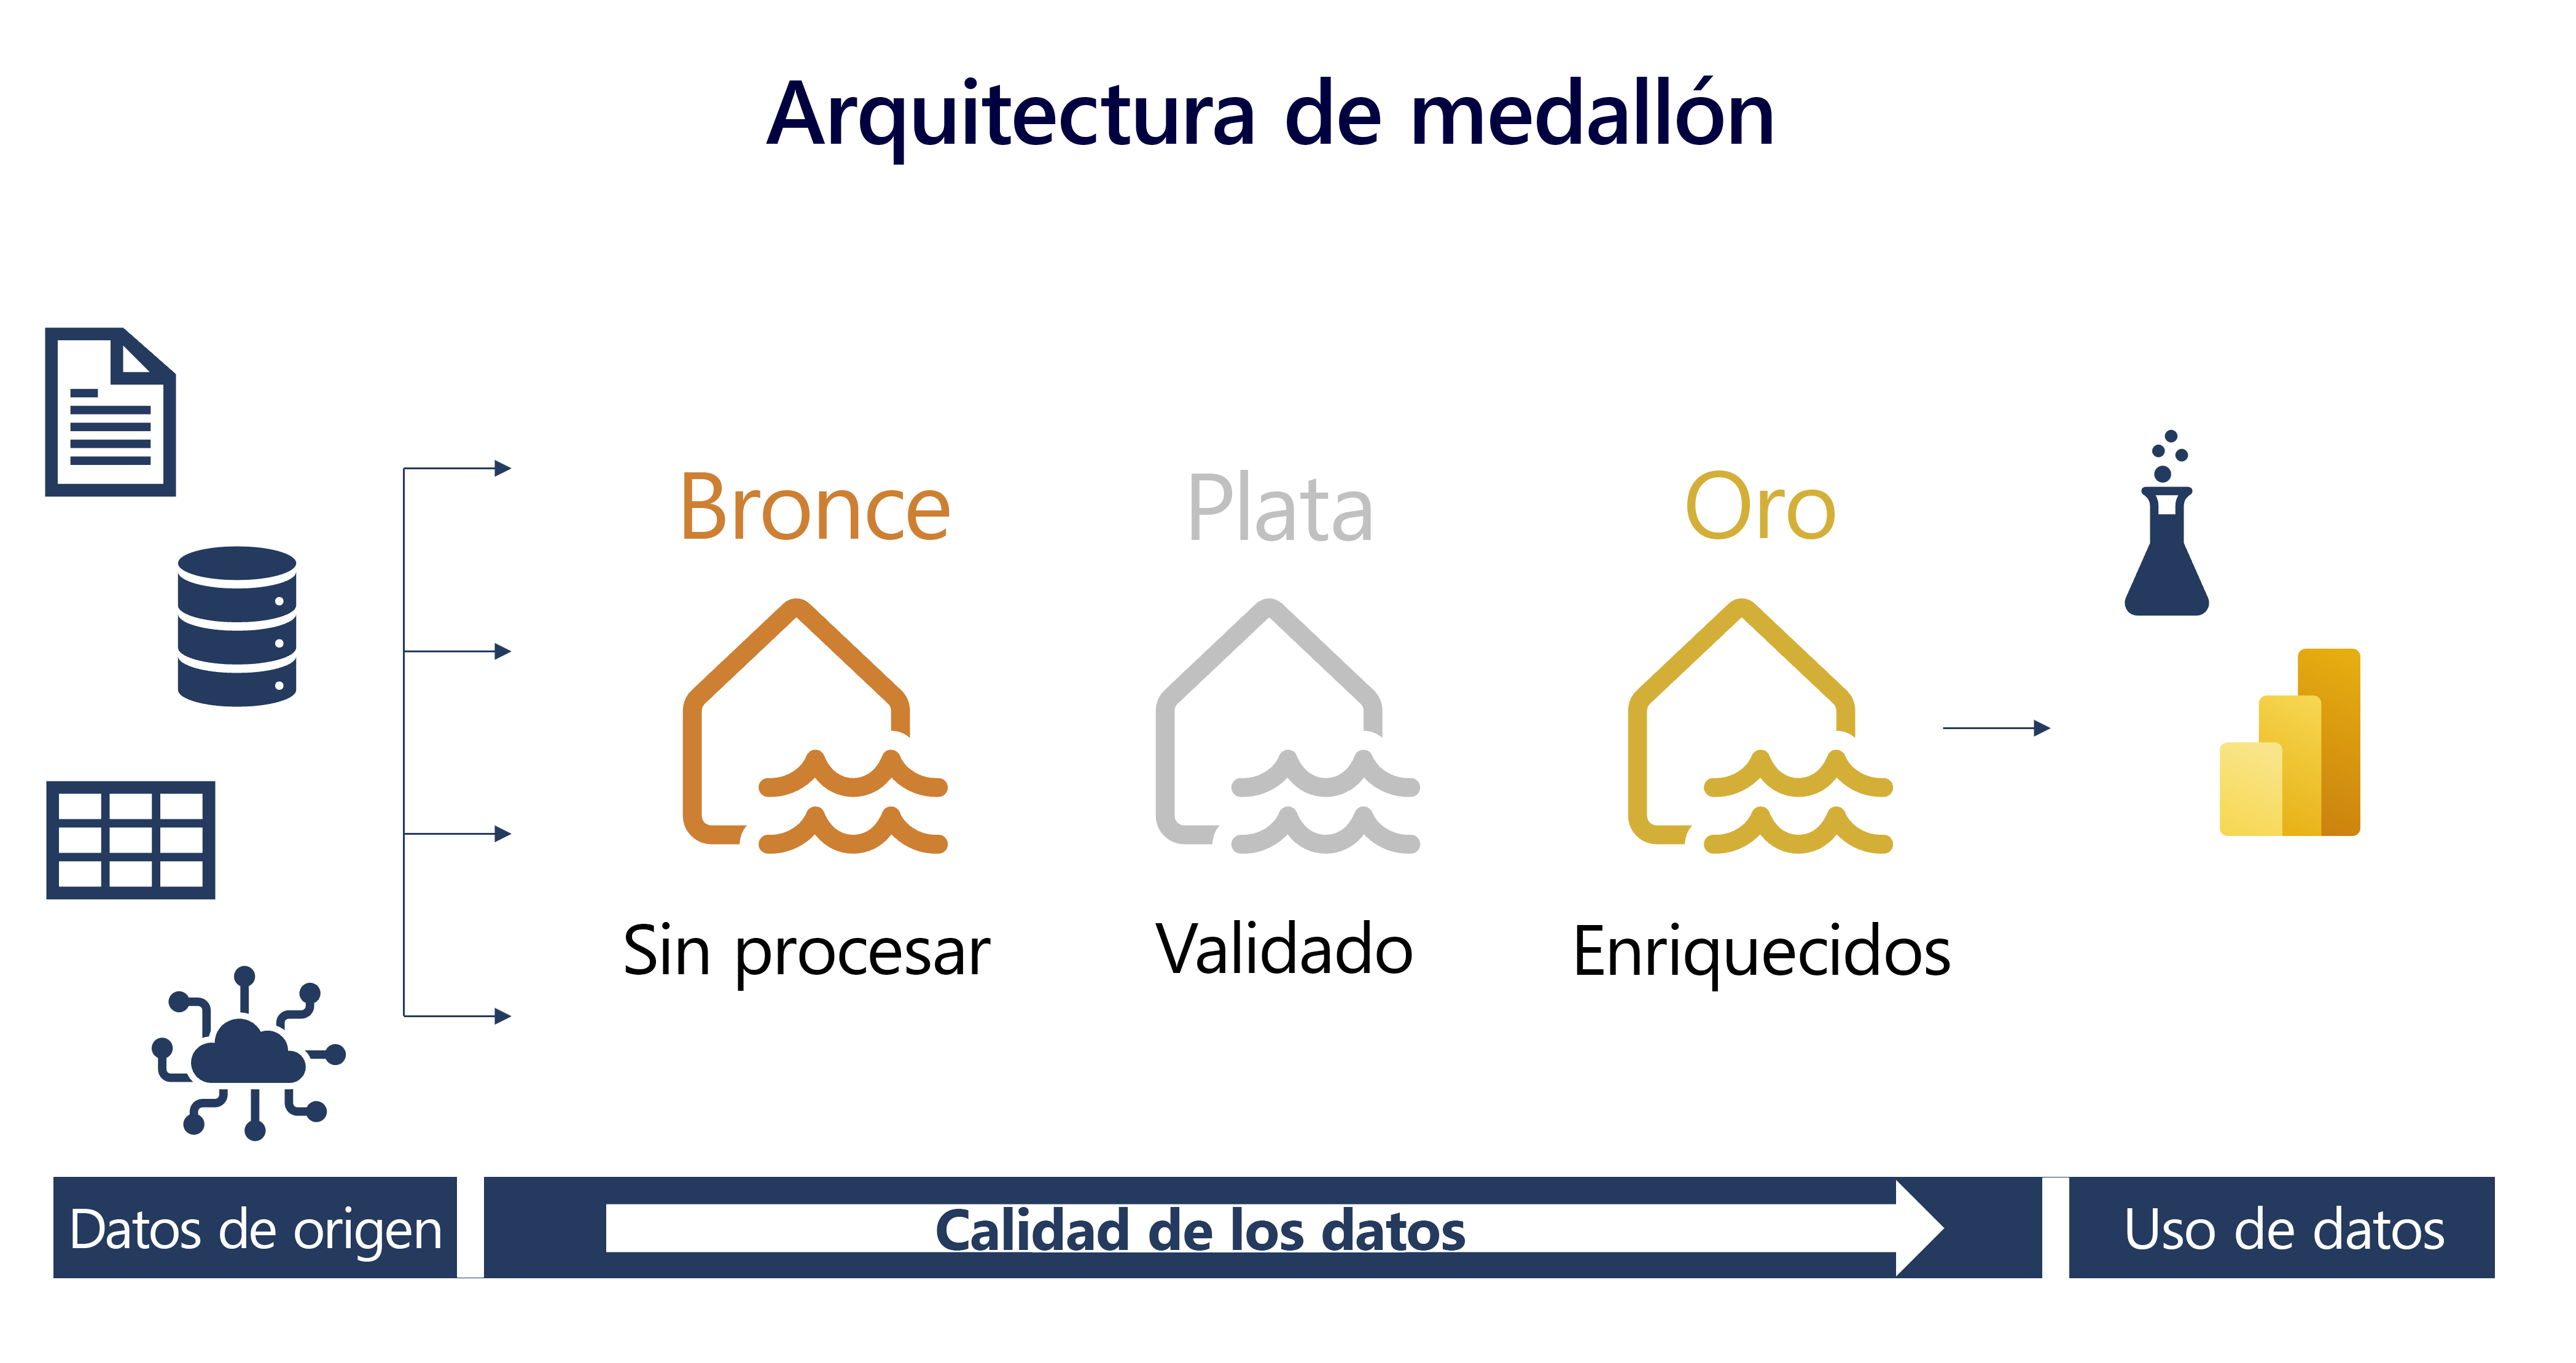 Diagram of a medallion architecture where data flows from the source to the bronze, silver, and gold layers.